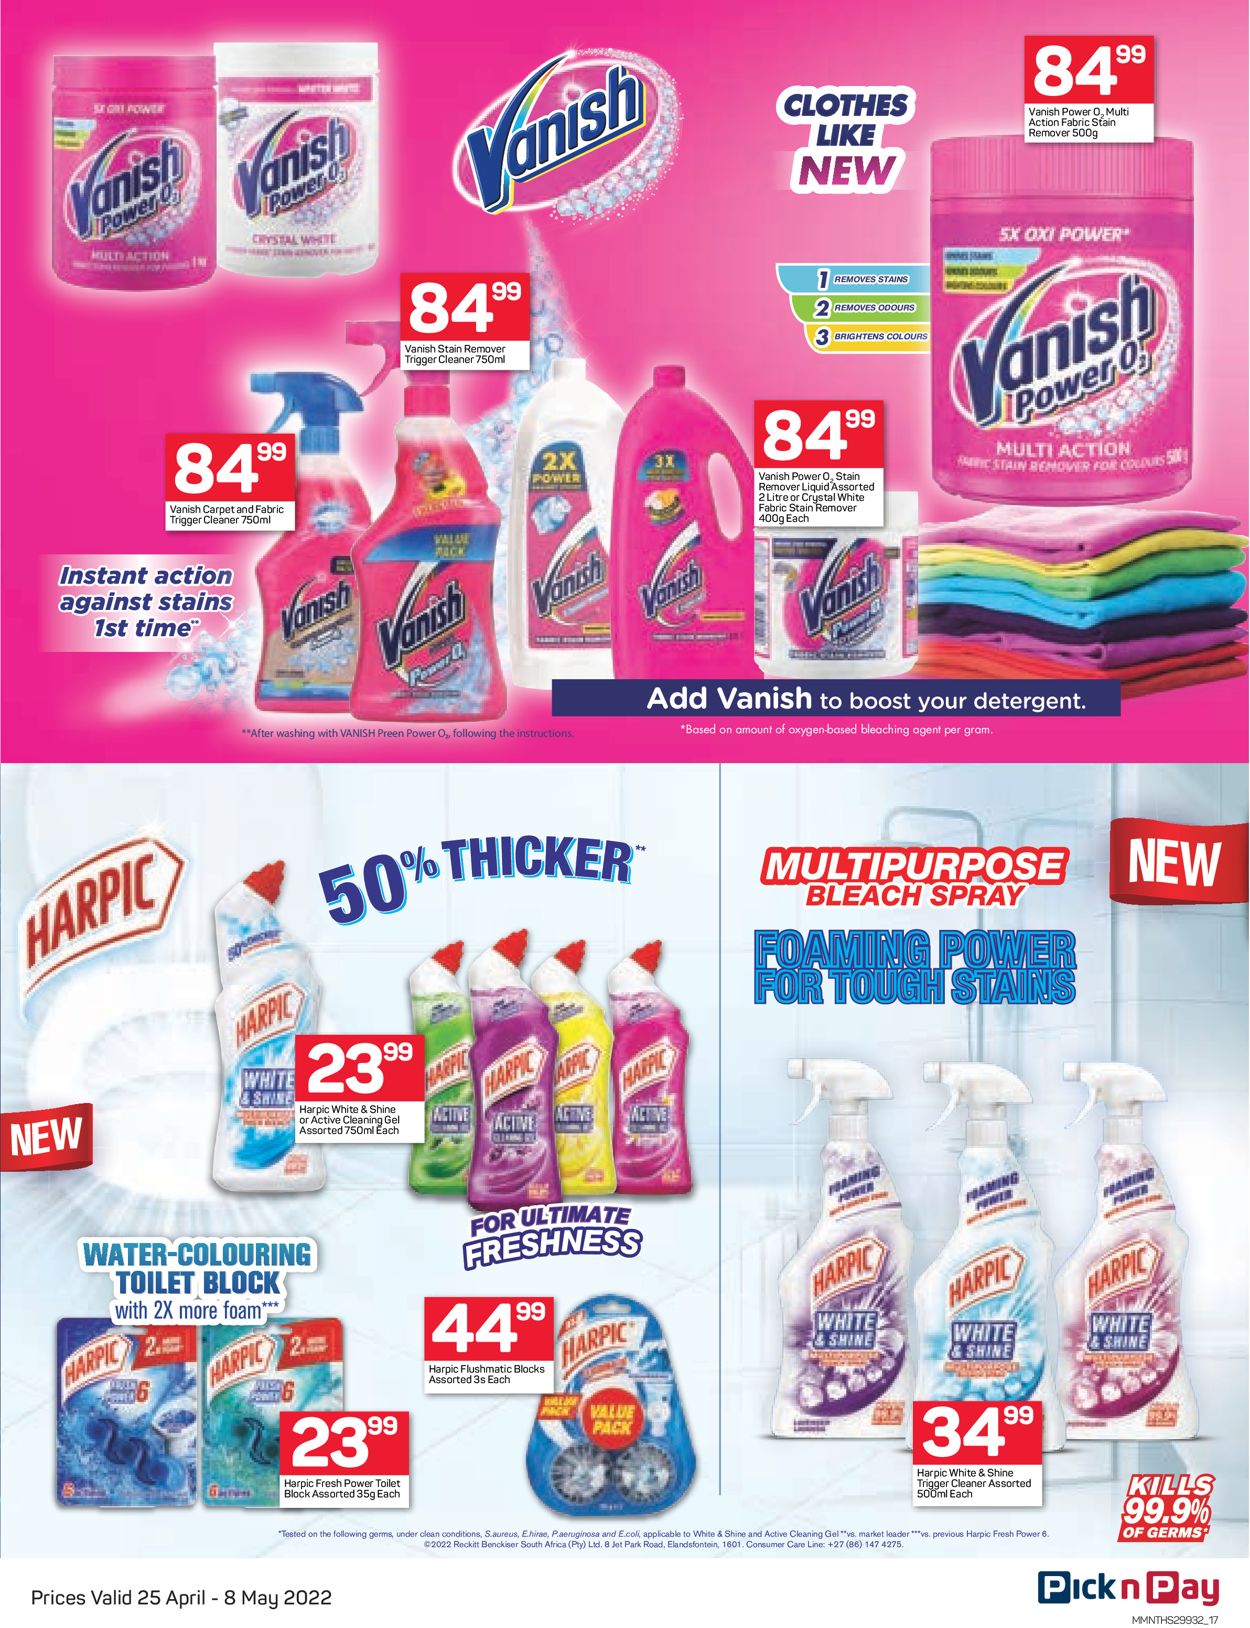 Pick n Pay Catalogue - 2022/04/25-2022/05/08 (Page 17)